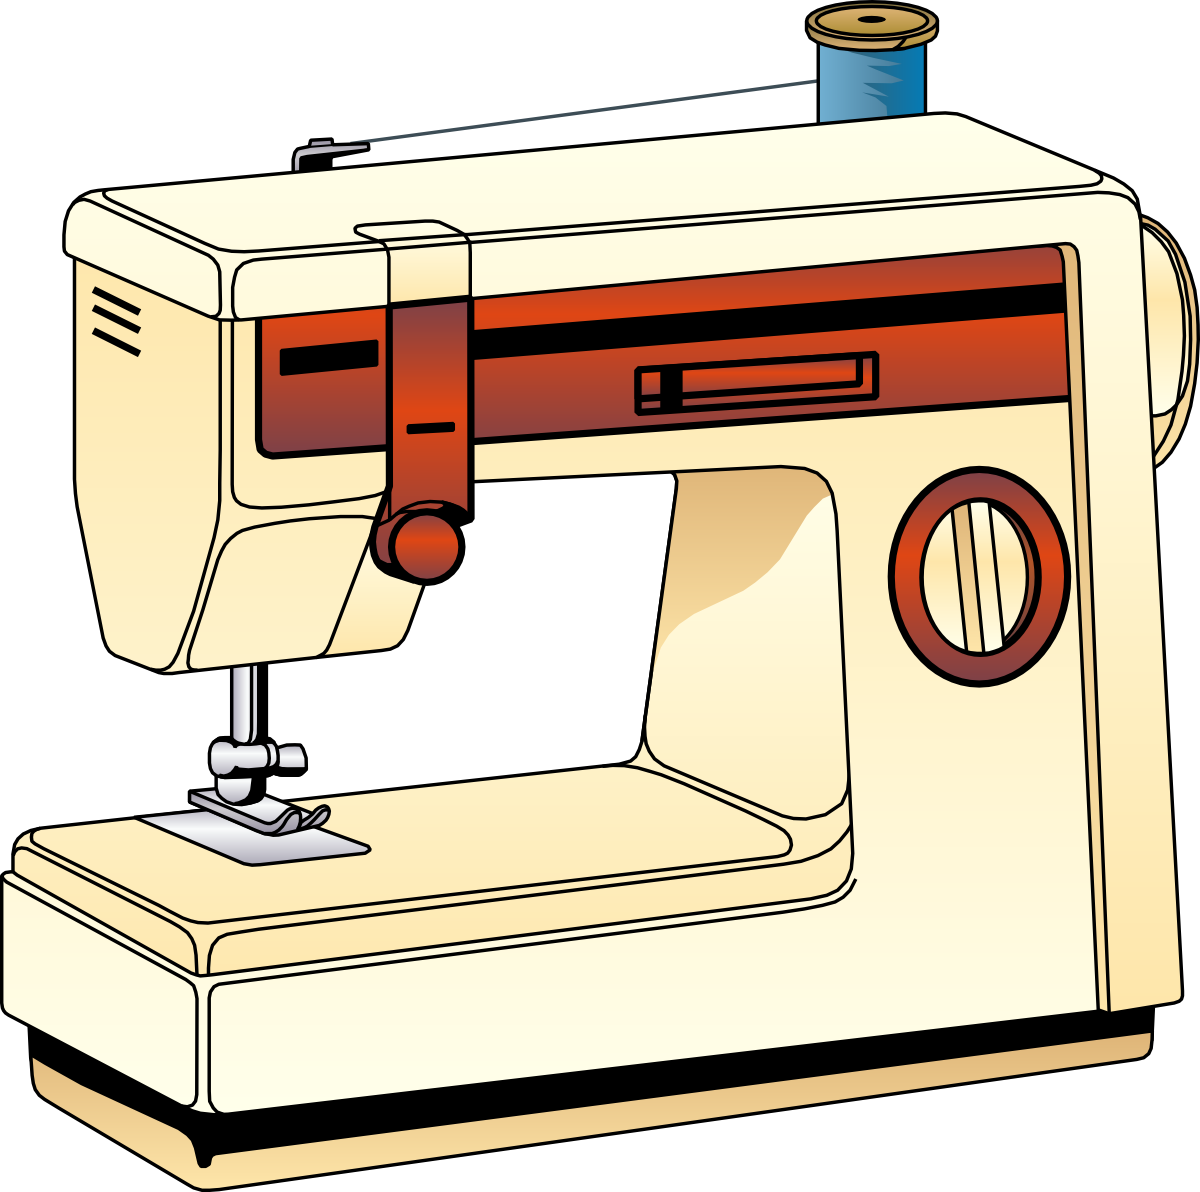 Sewing machine sewing clipart clipart kid